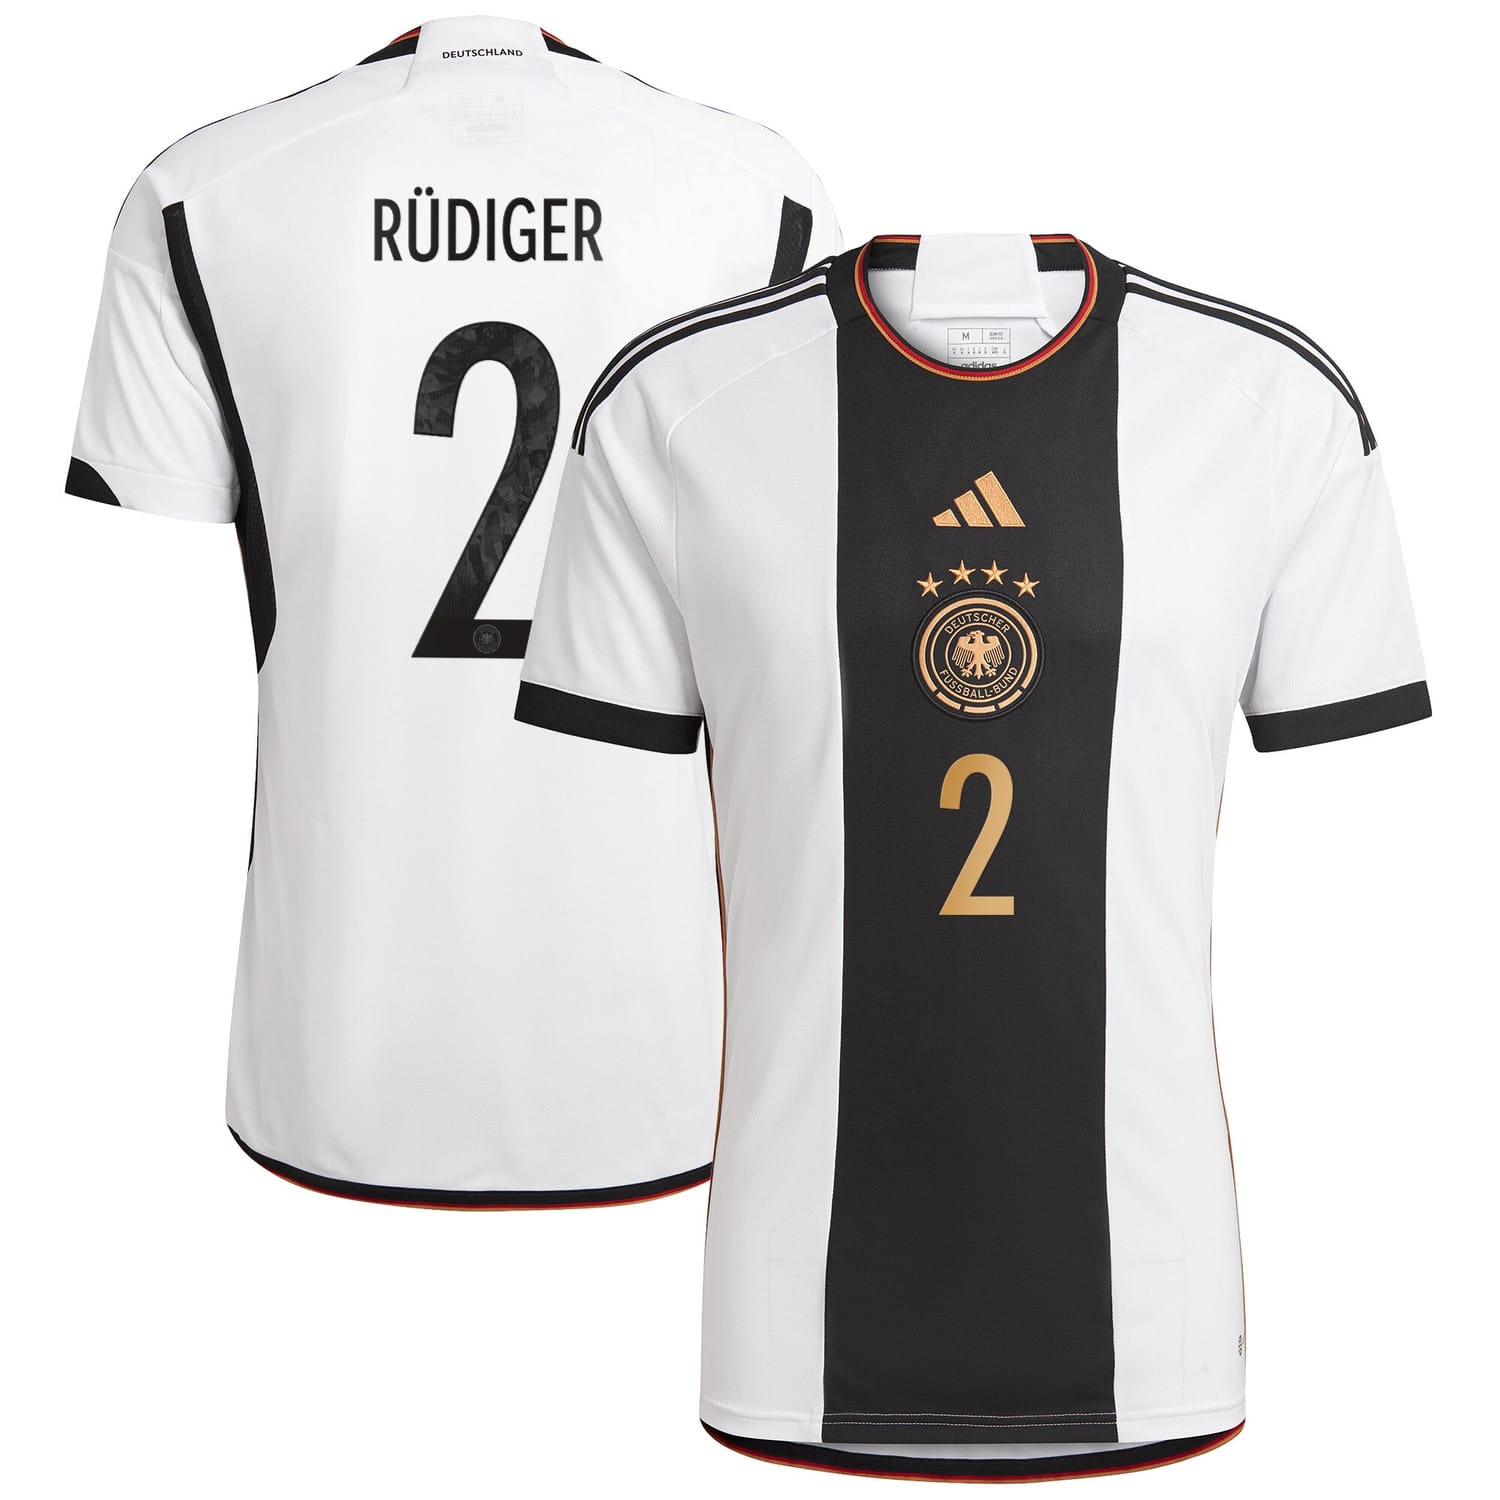 Germany National Team Home Jersey Shirt player Antonio Rüdiger 2 printing for Men